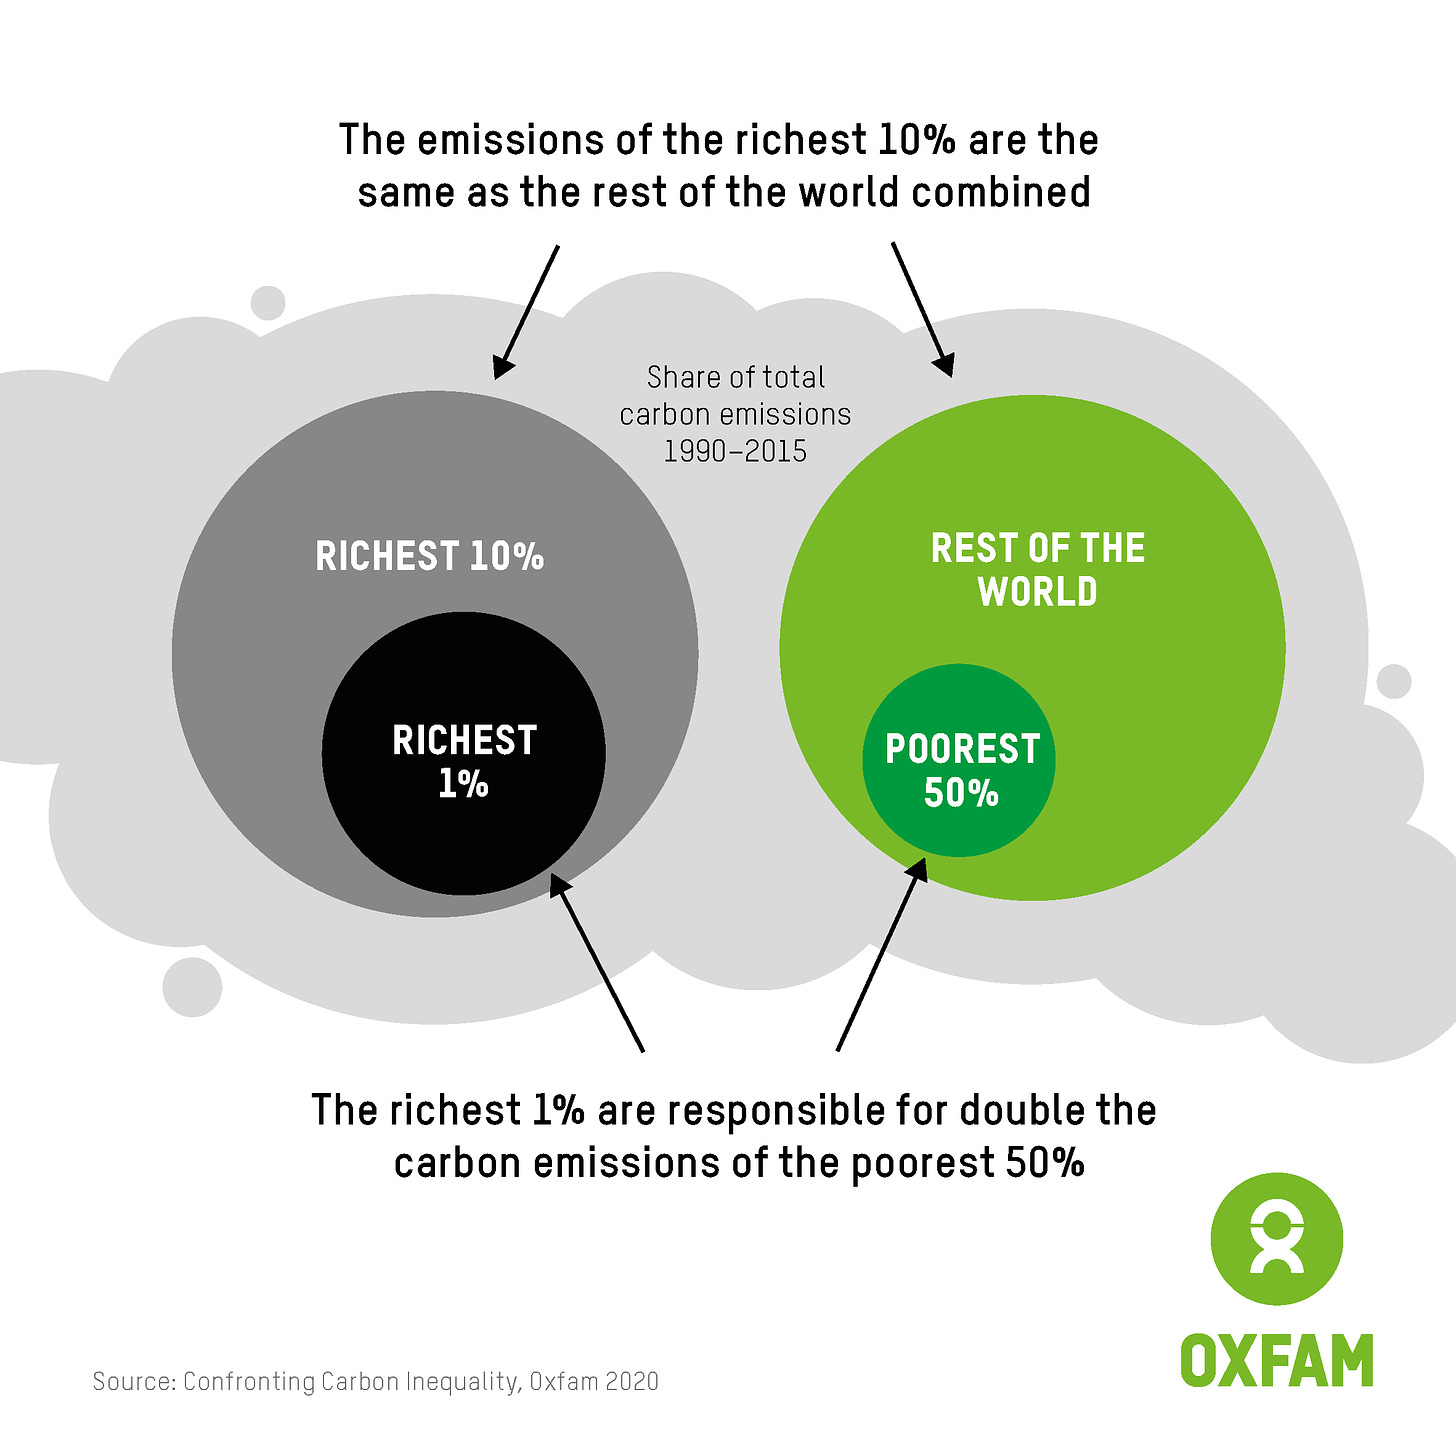 A graph from Oxfam that shows that the emissions of the richest 10% are the same as the rest of the world combined.